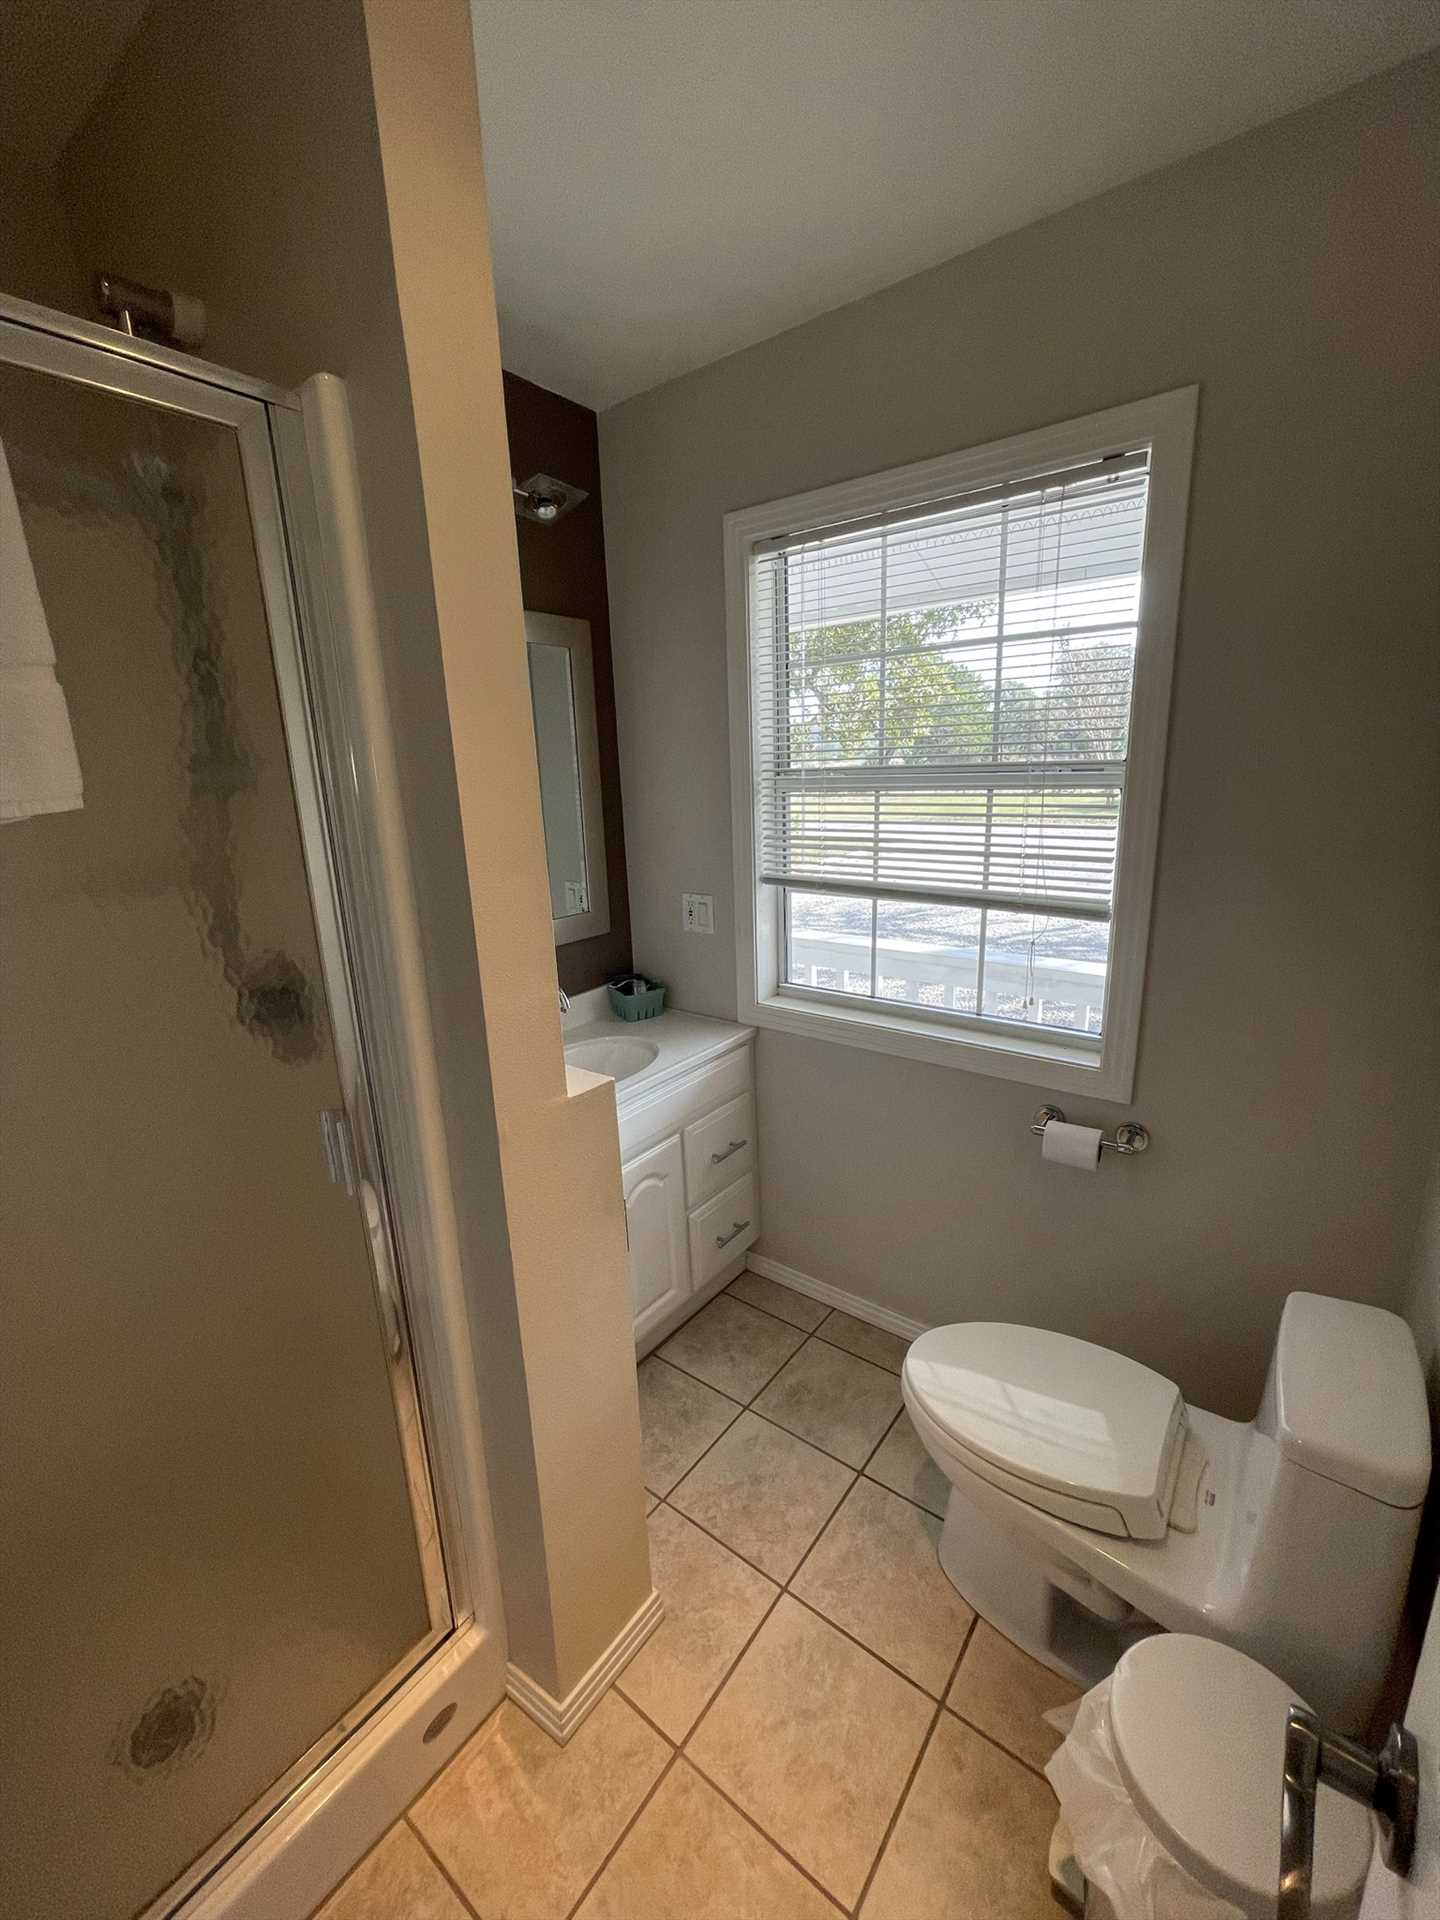                                                 The second full bath is immaculately clean, too, complete with a convenient vanity and shower.